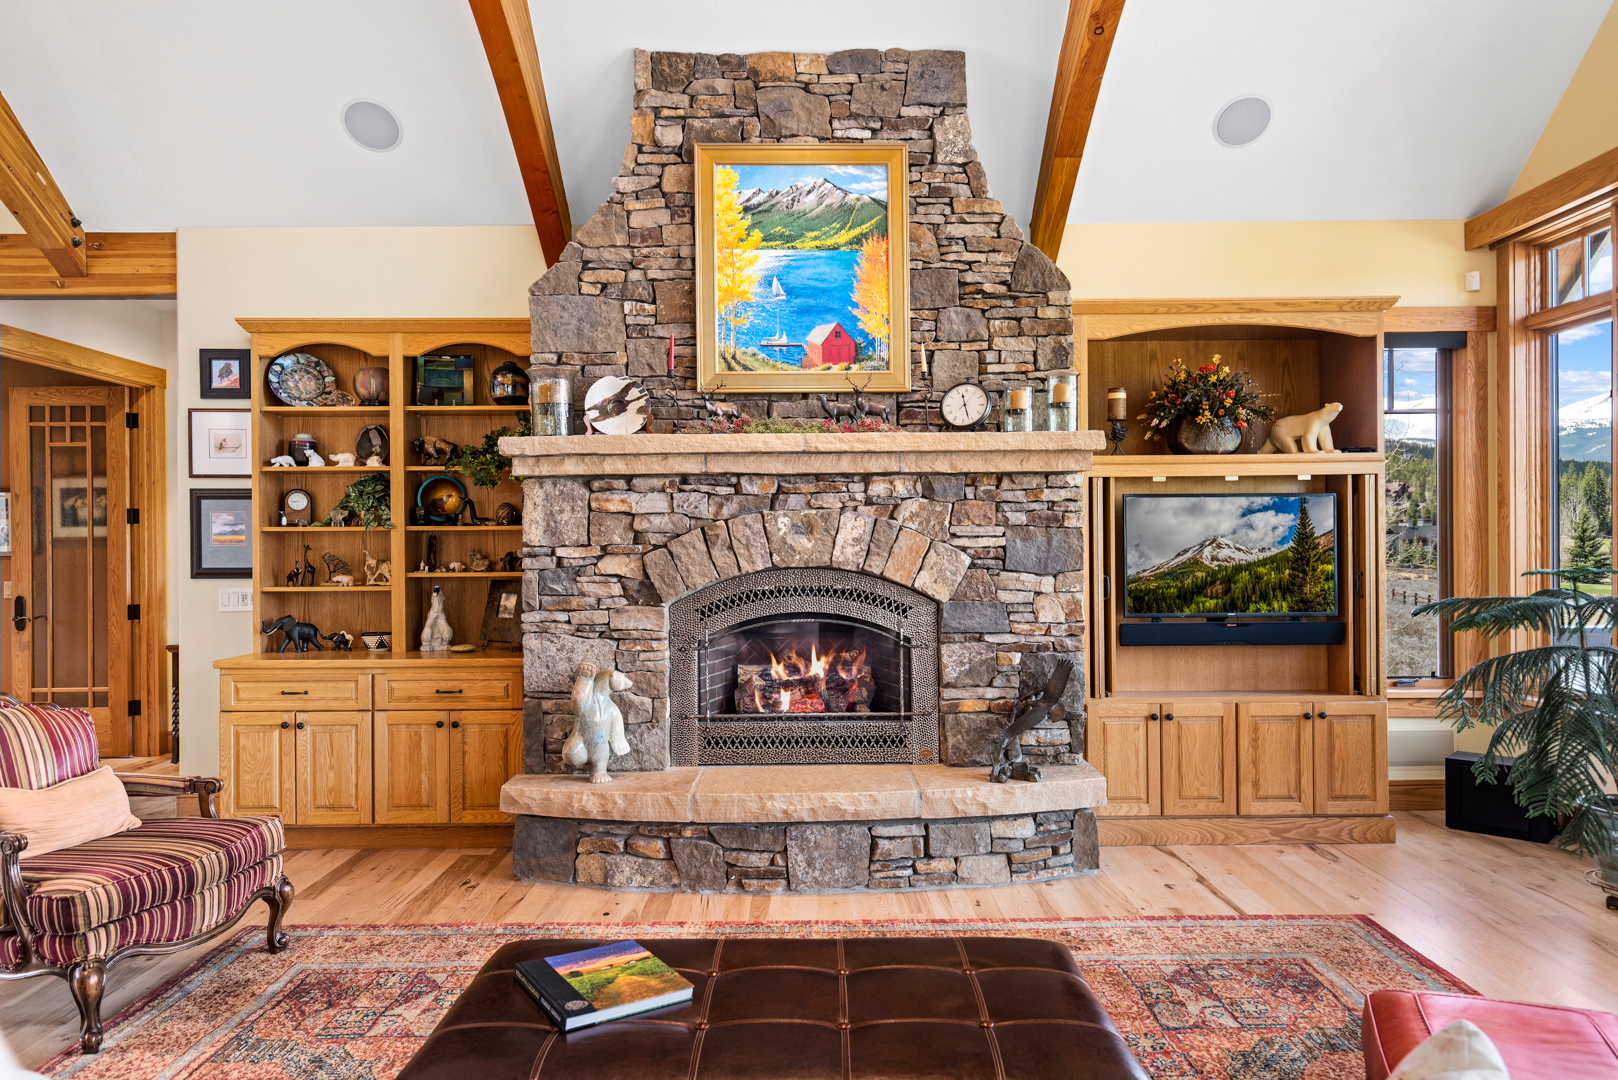  Living room fireplace closeup real estate photography 